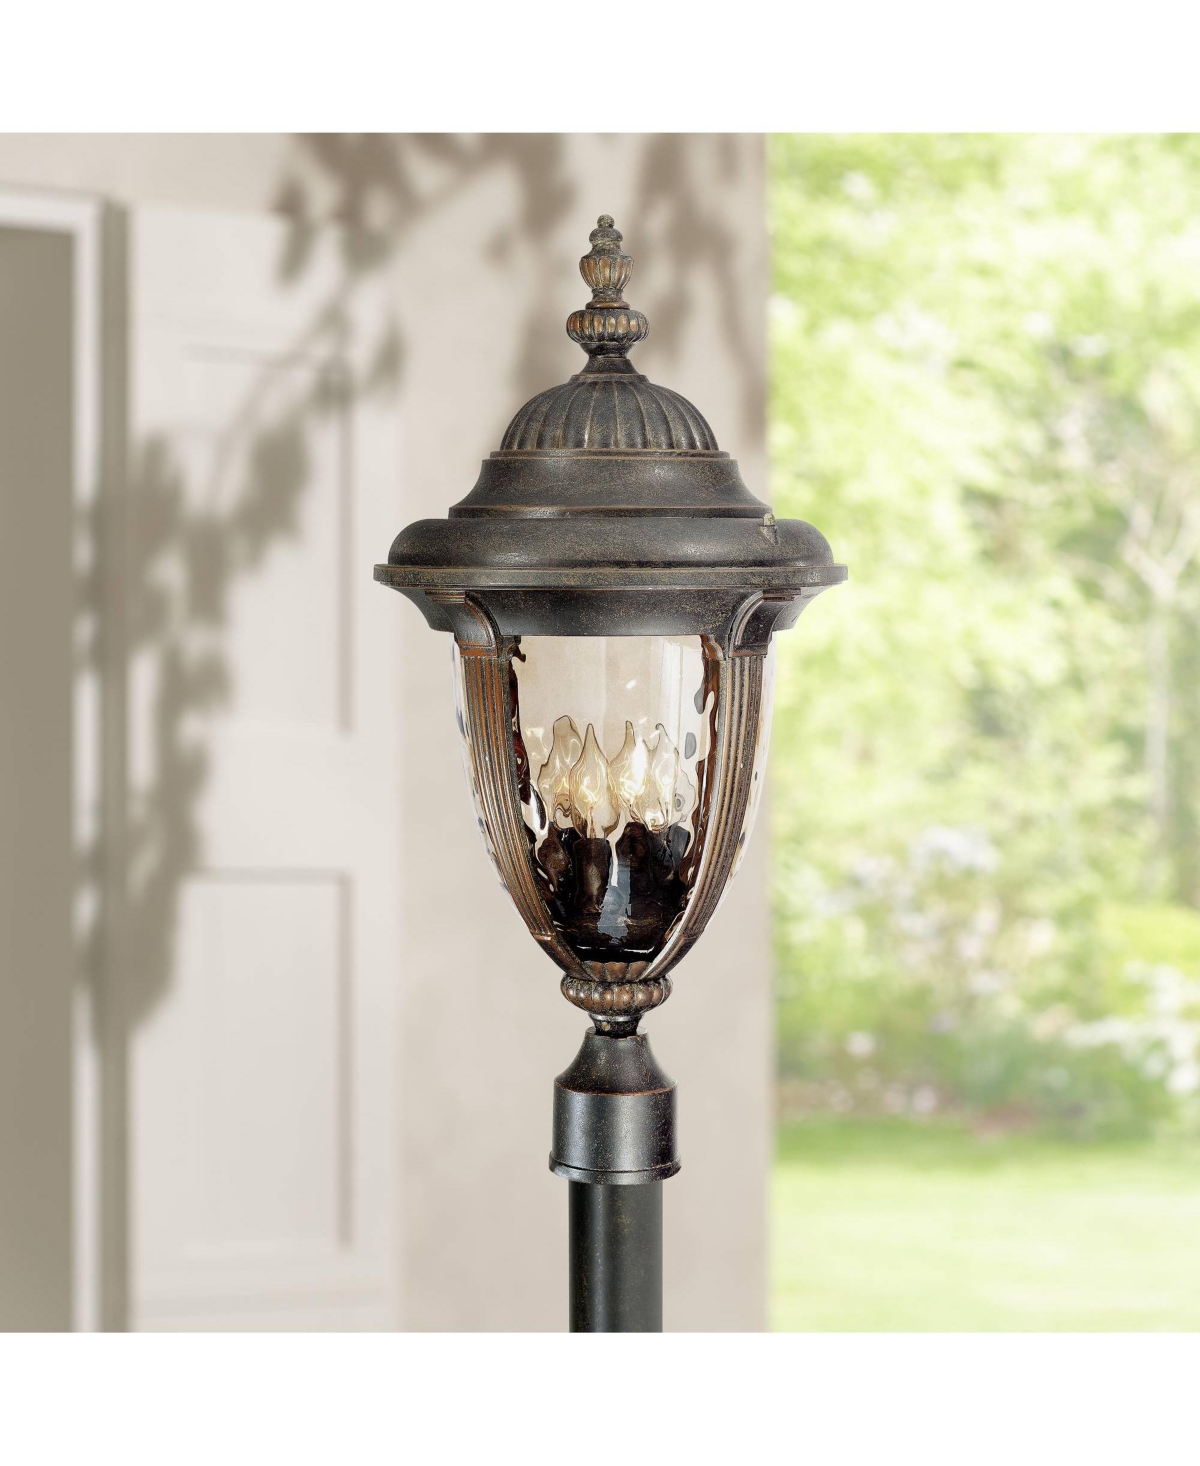 Bellagio Rustic Farmhouse Outdoor Post Light Fixture Veranda Bronze 24 1/2" Champagne Hammered Glass for Exterior Barn Deck House Porch Yard Patio Out